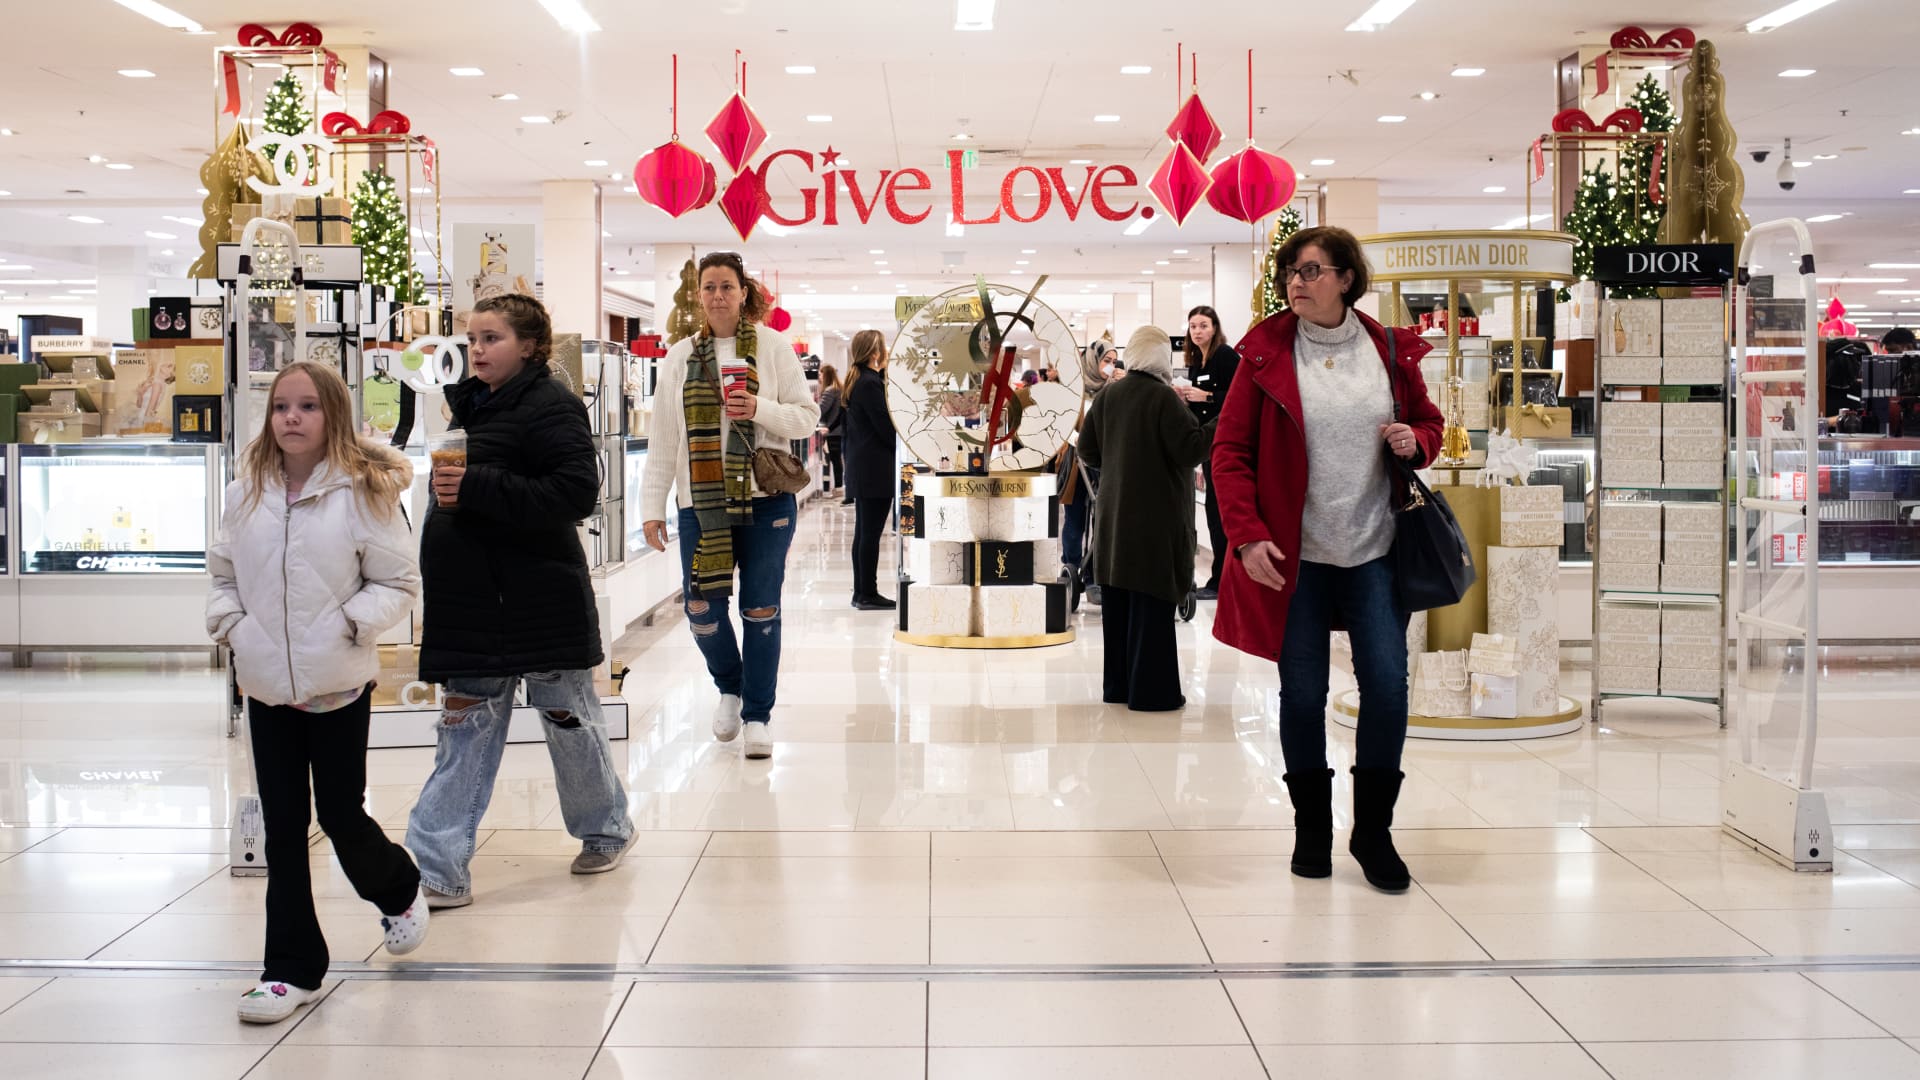 Retail sales rose 0.3% in November vs. expectations for a decline